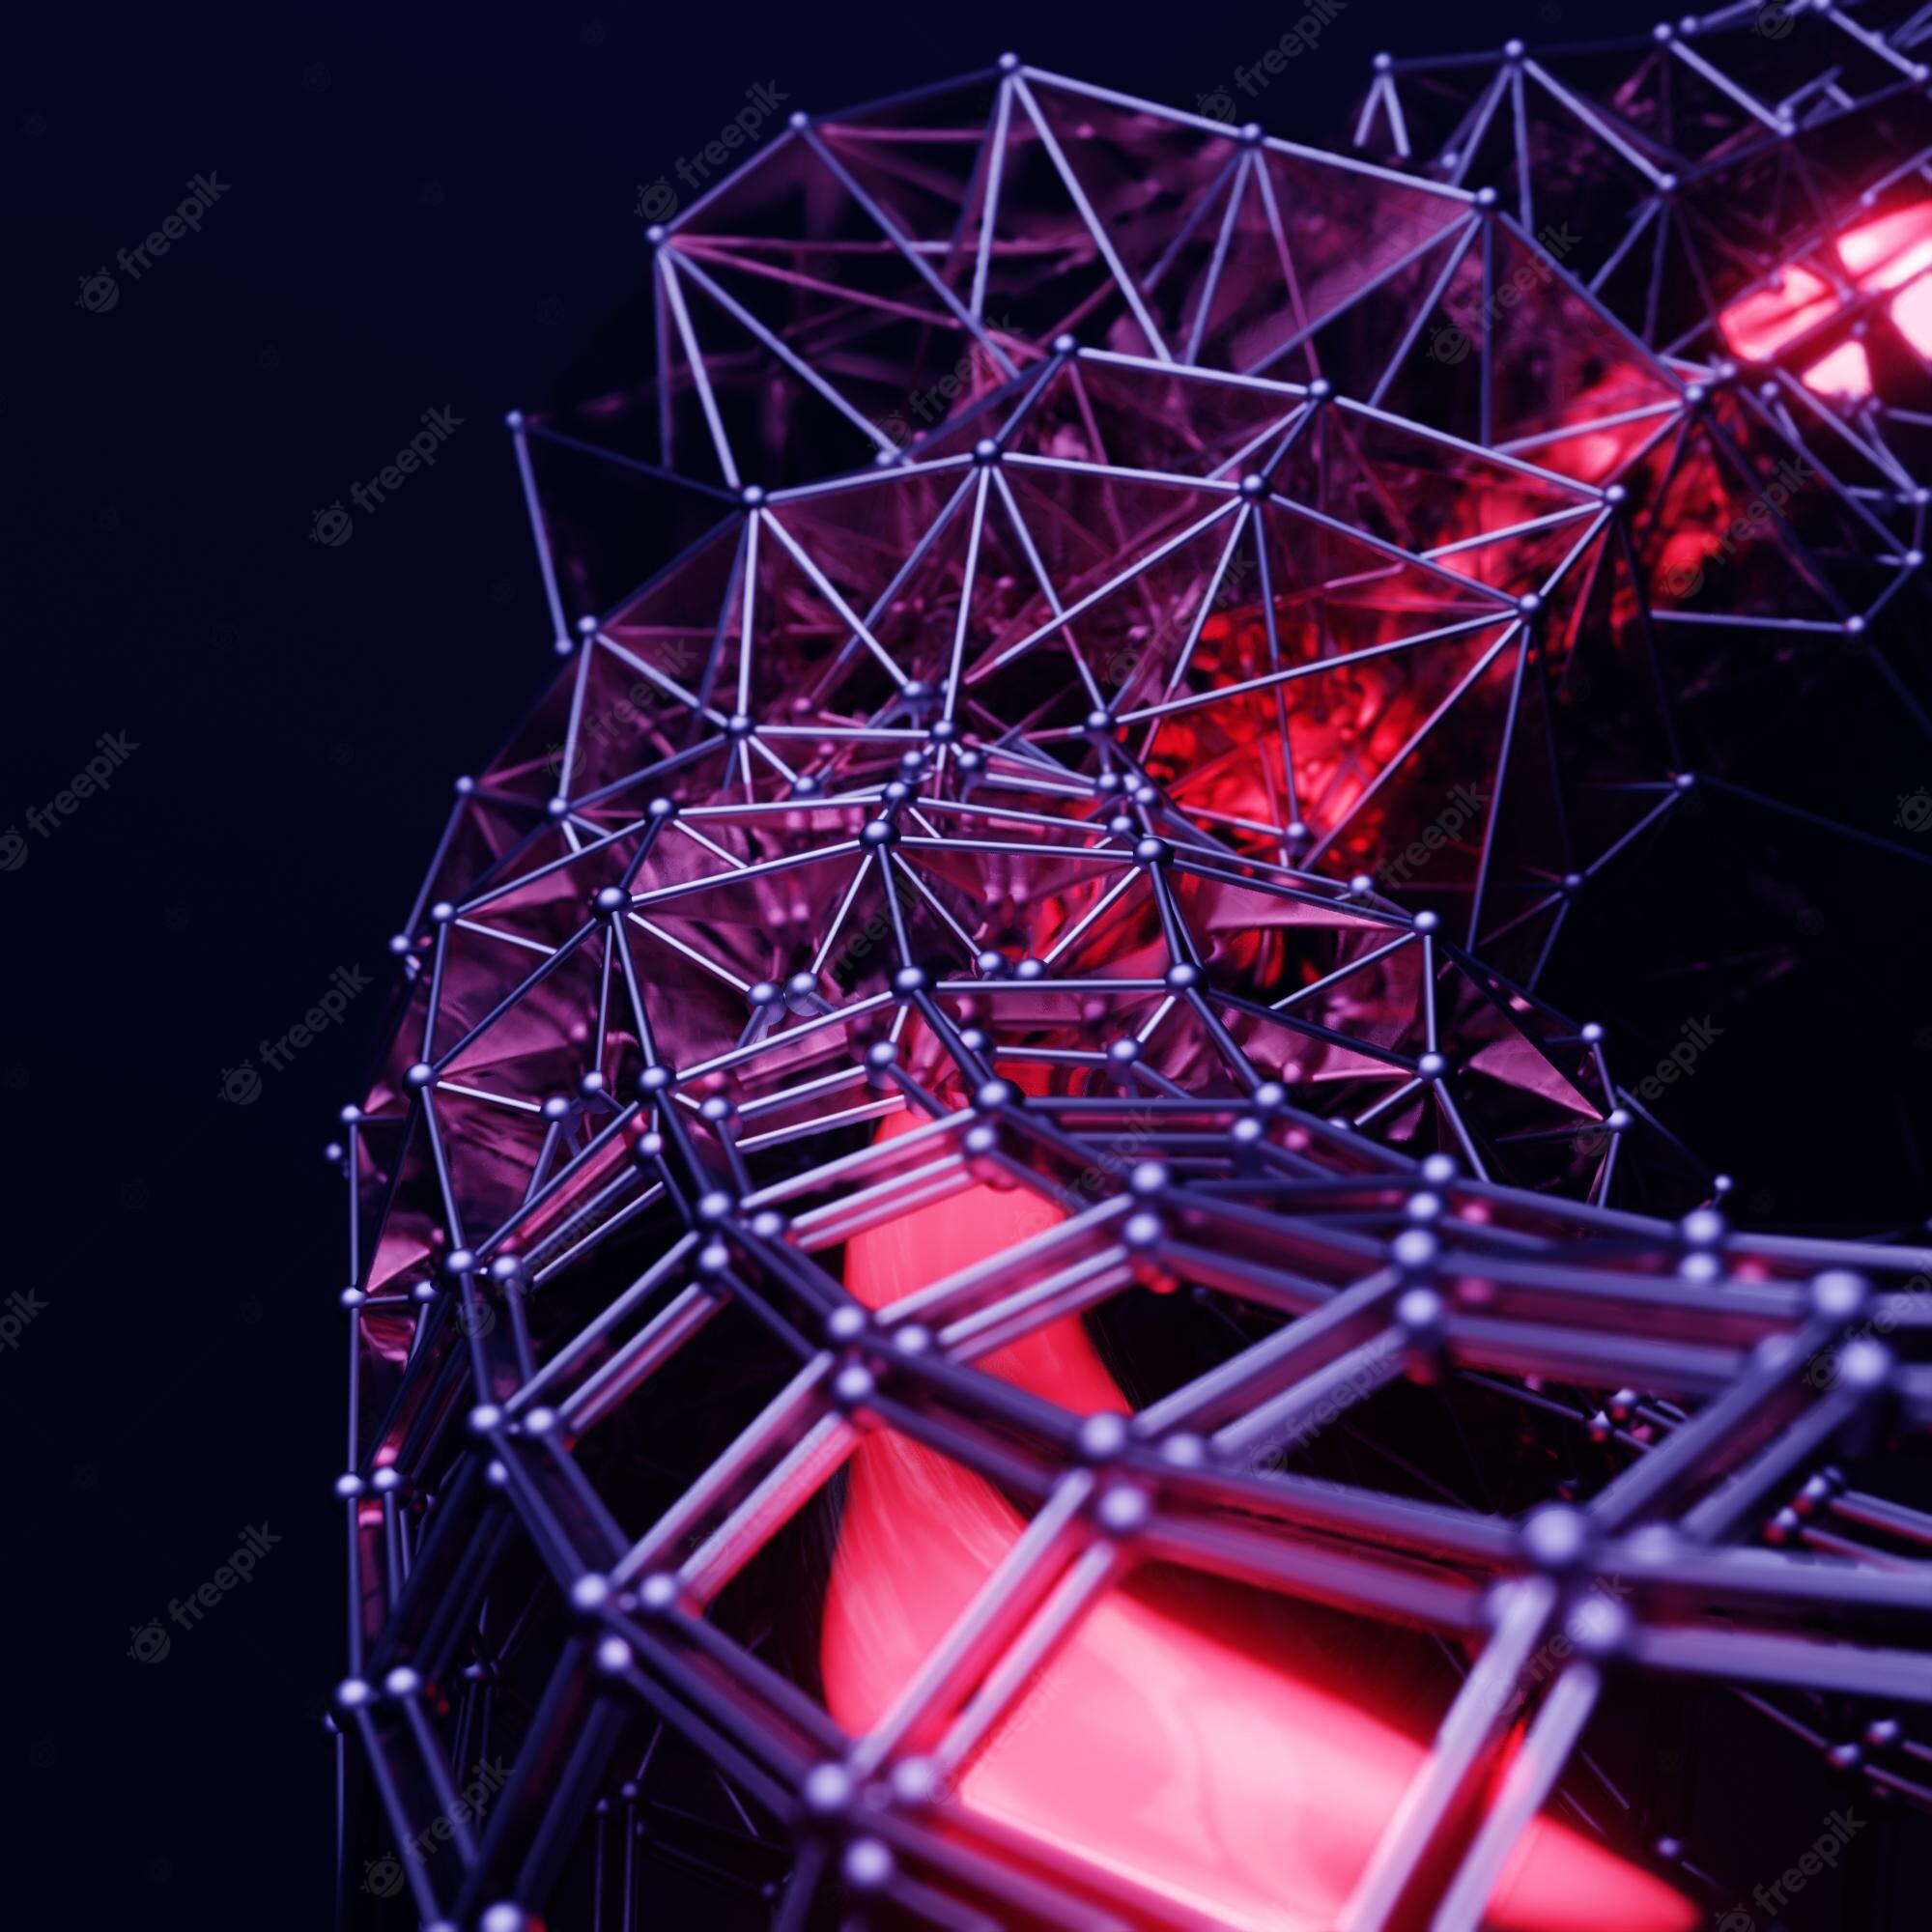 An abstract 3D render of a complex network of interconnected structures in red and purple tones - Alien, 3D